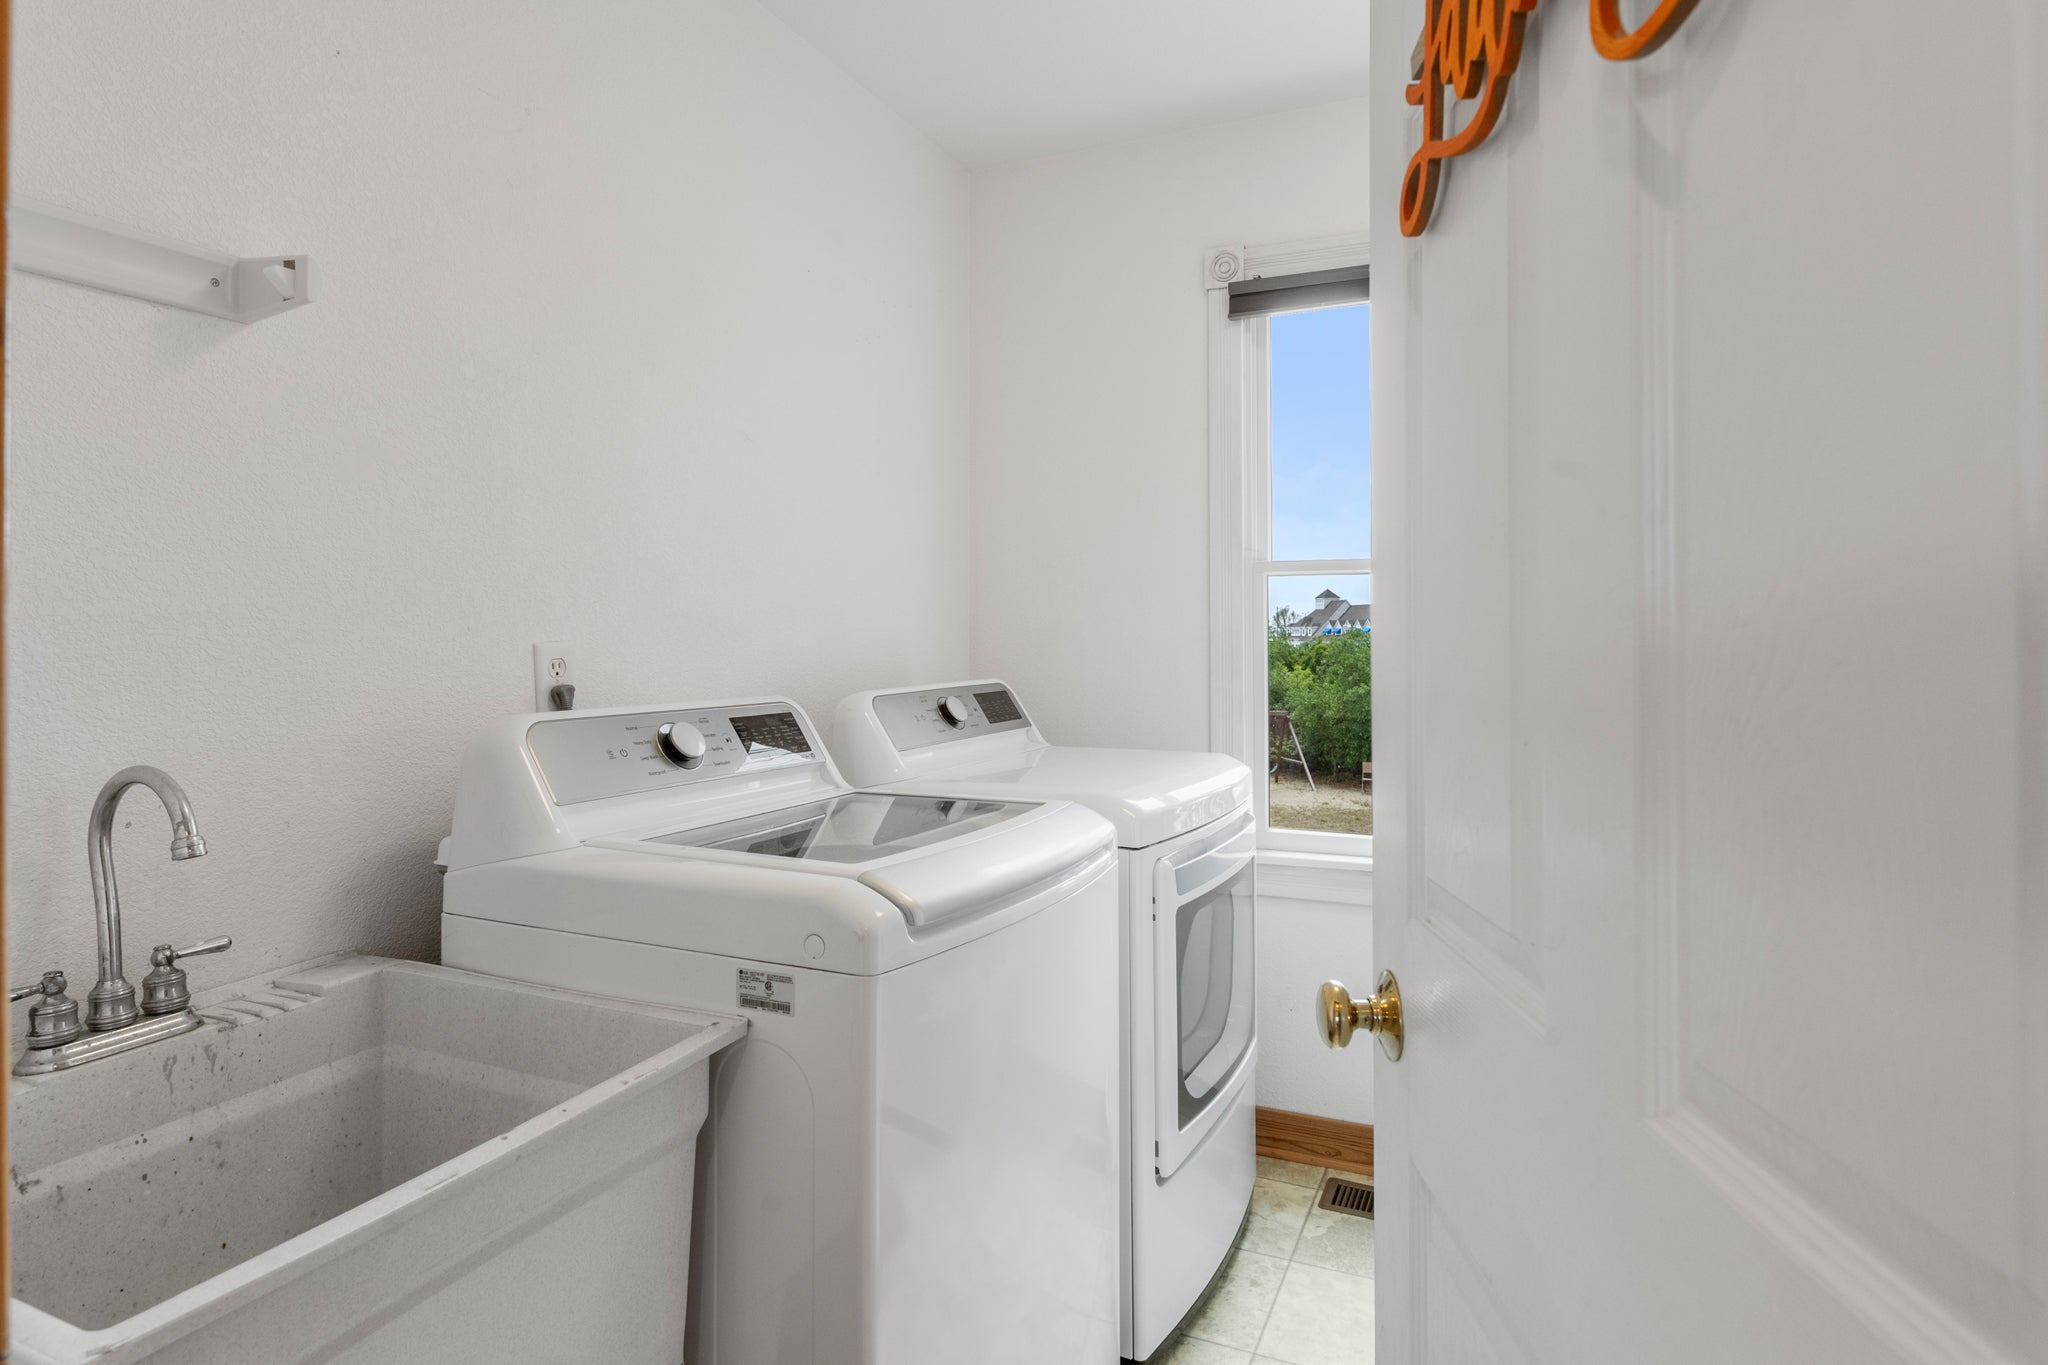 WH616: Blue Bomber | Mid Level Bedroom Laundry